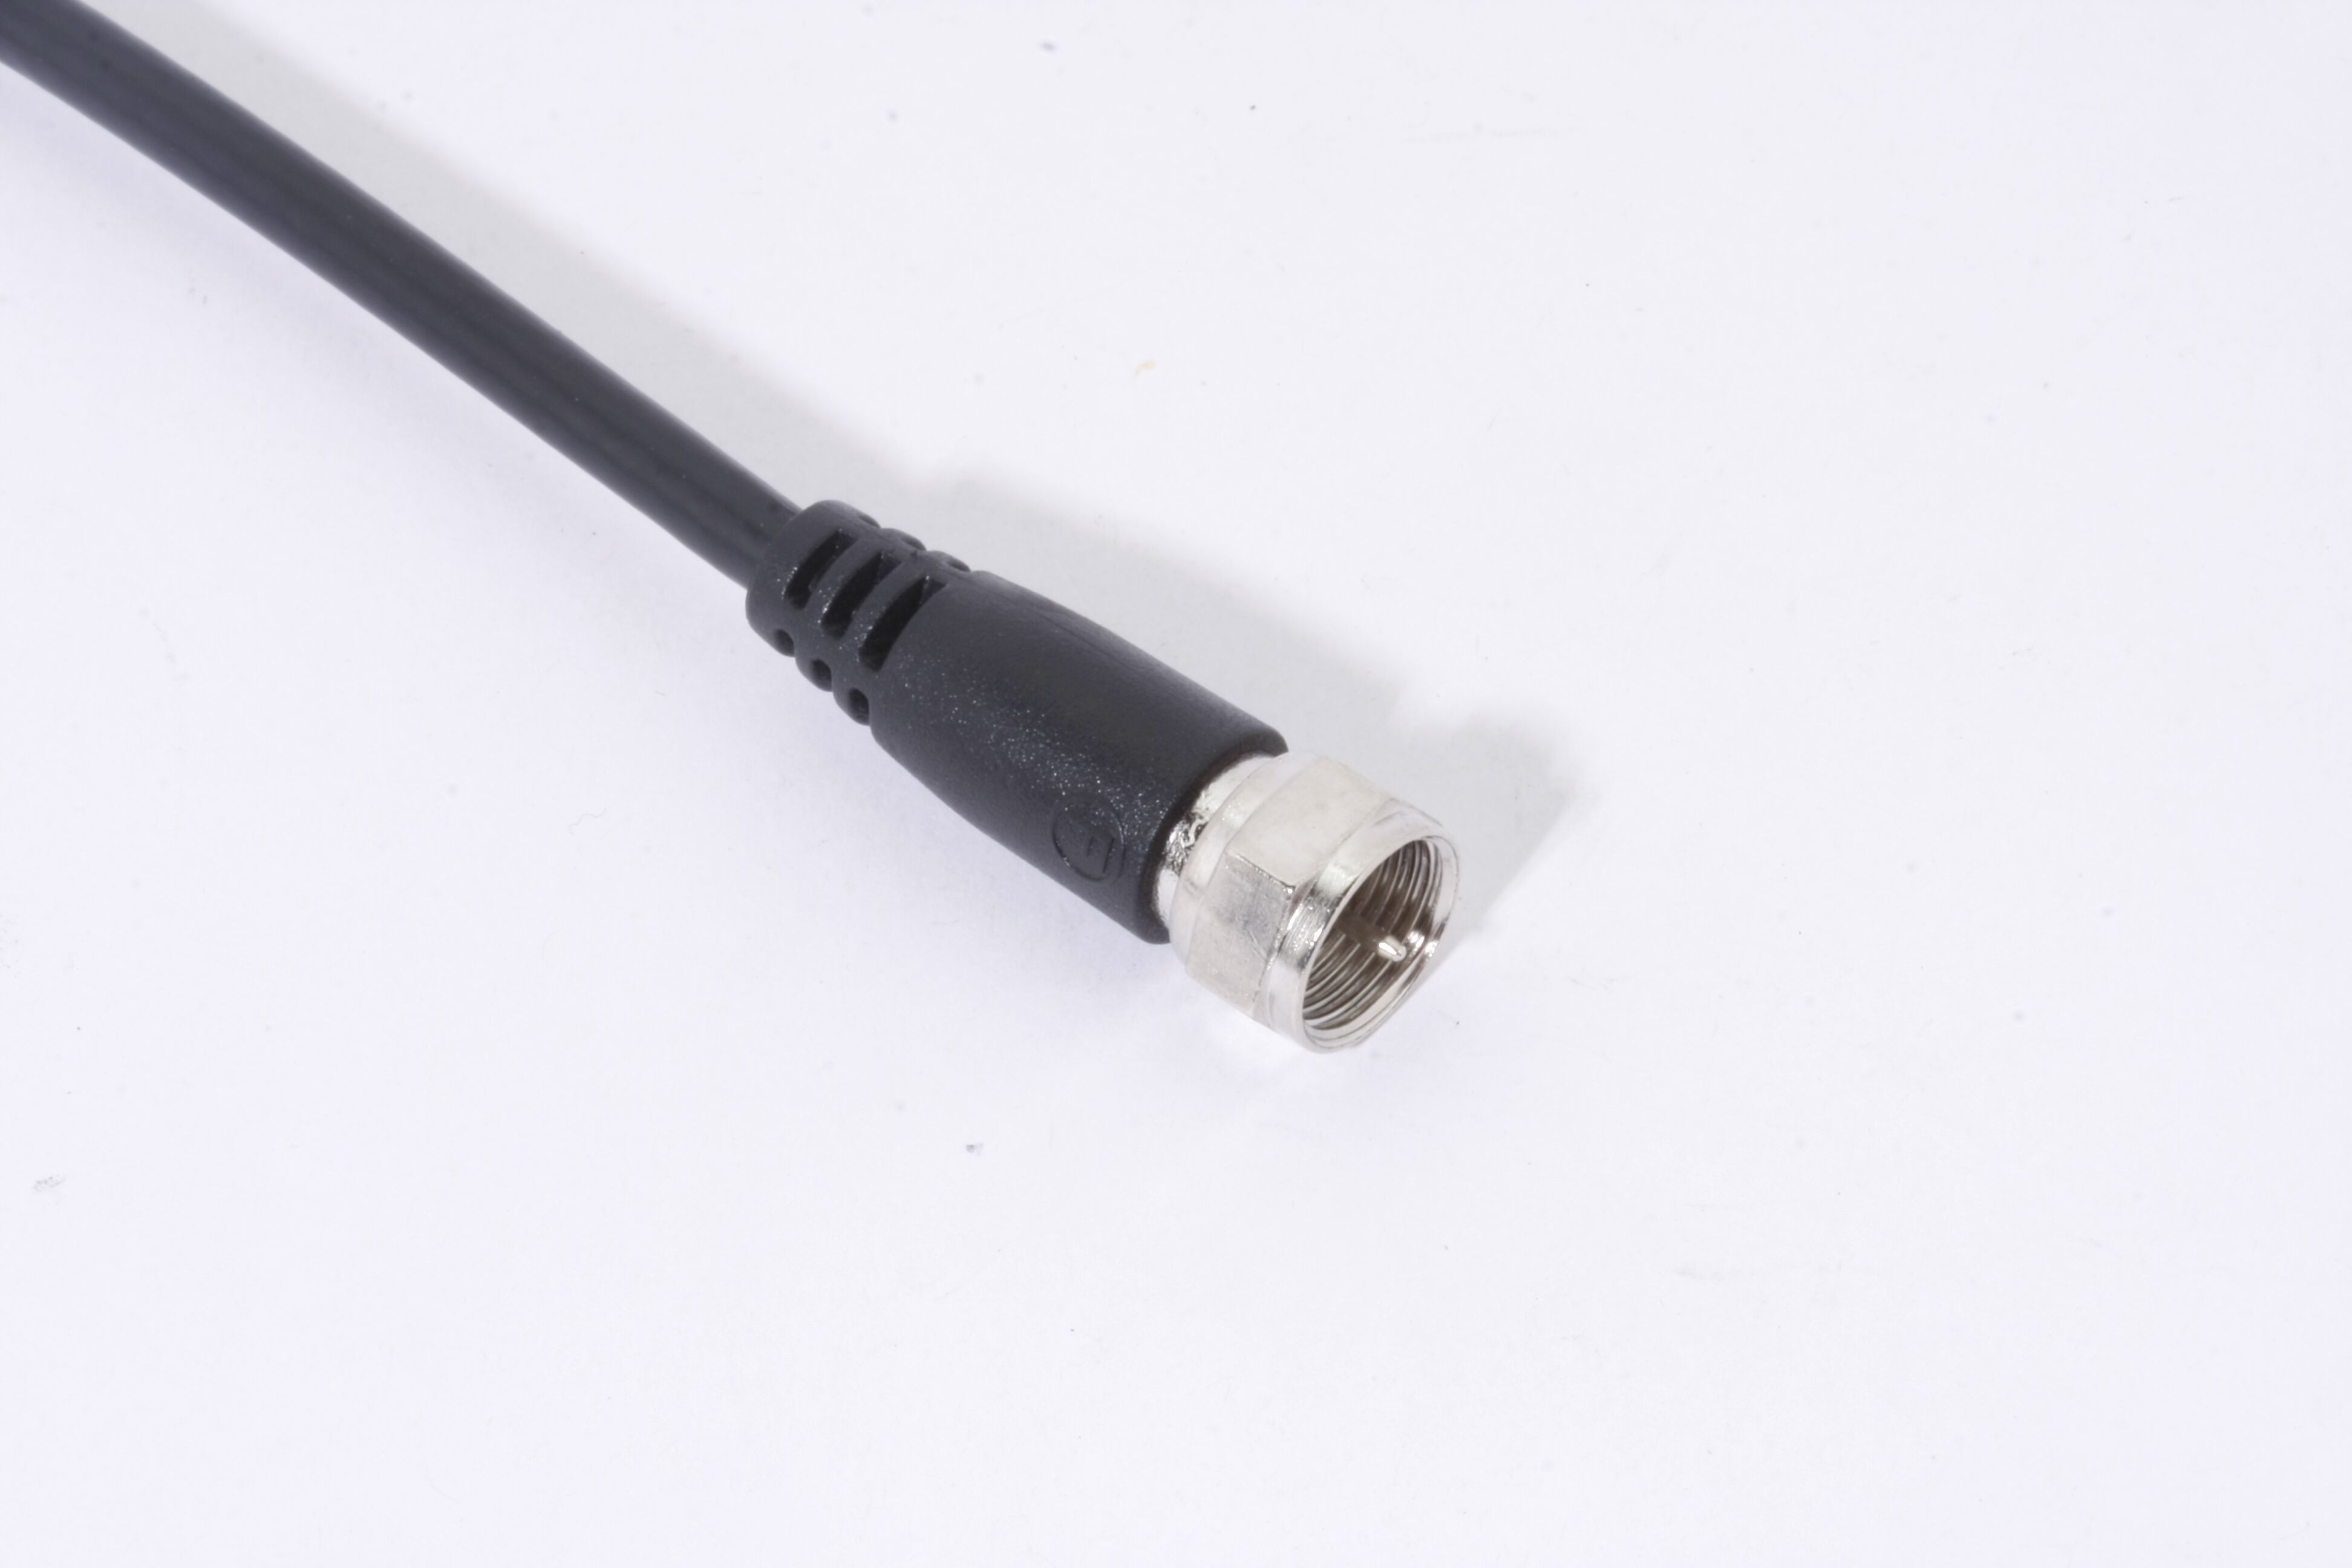 2.5C-2V Coaxial Cable